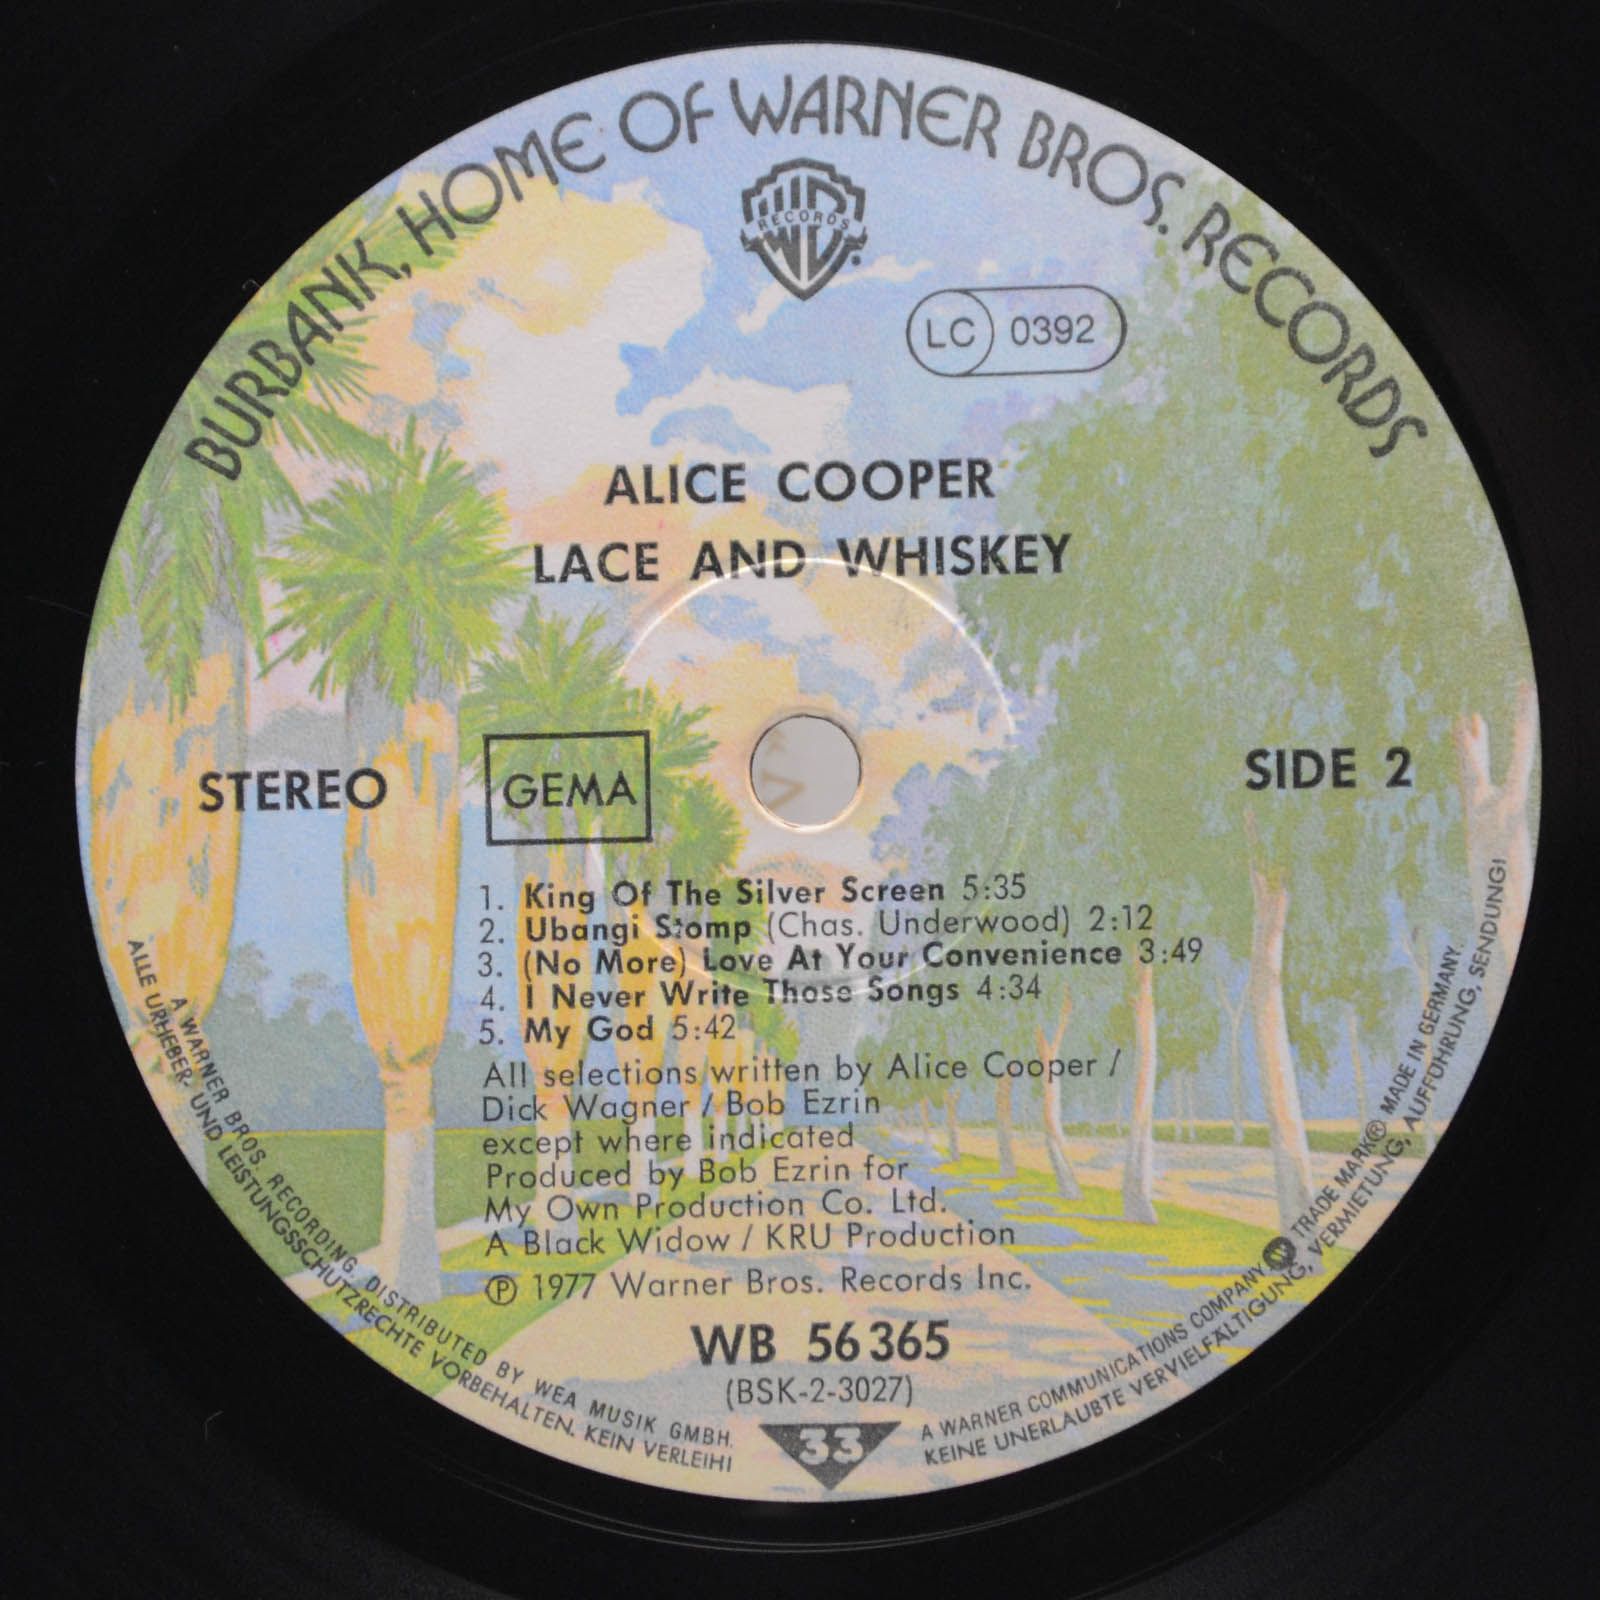 Alice Cooper — Lace And Whiskey, 1977